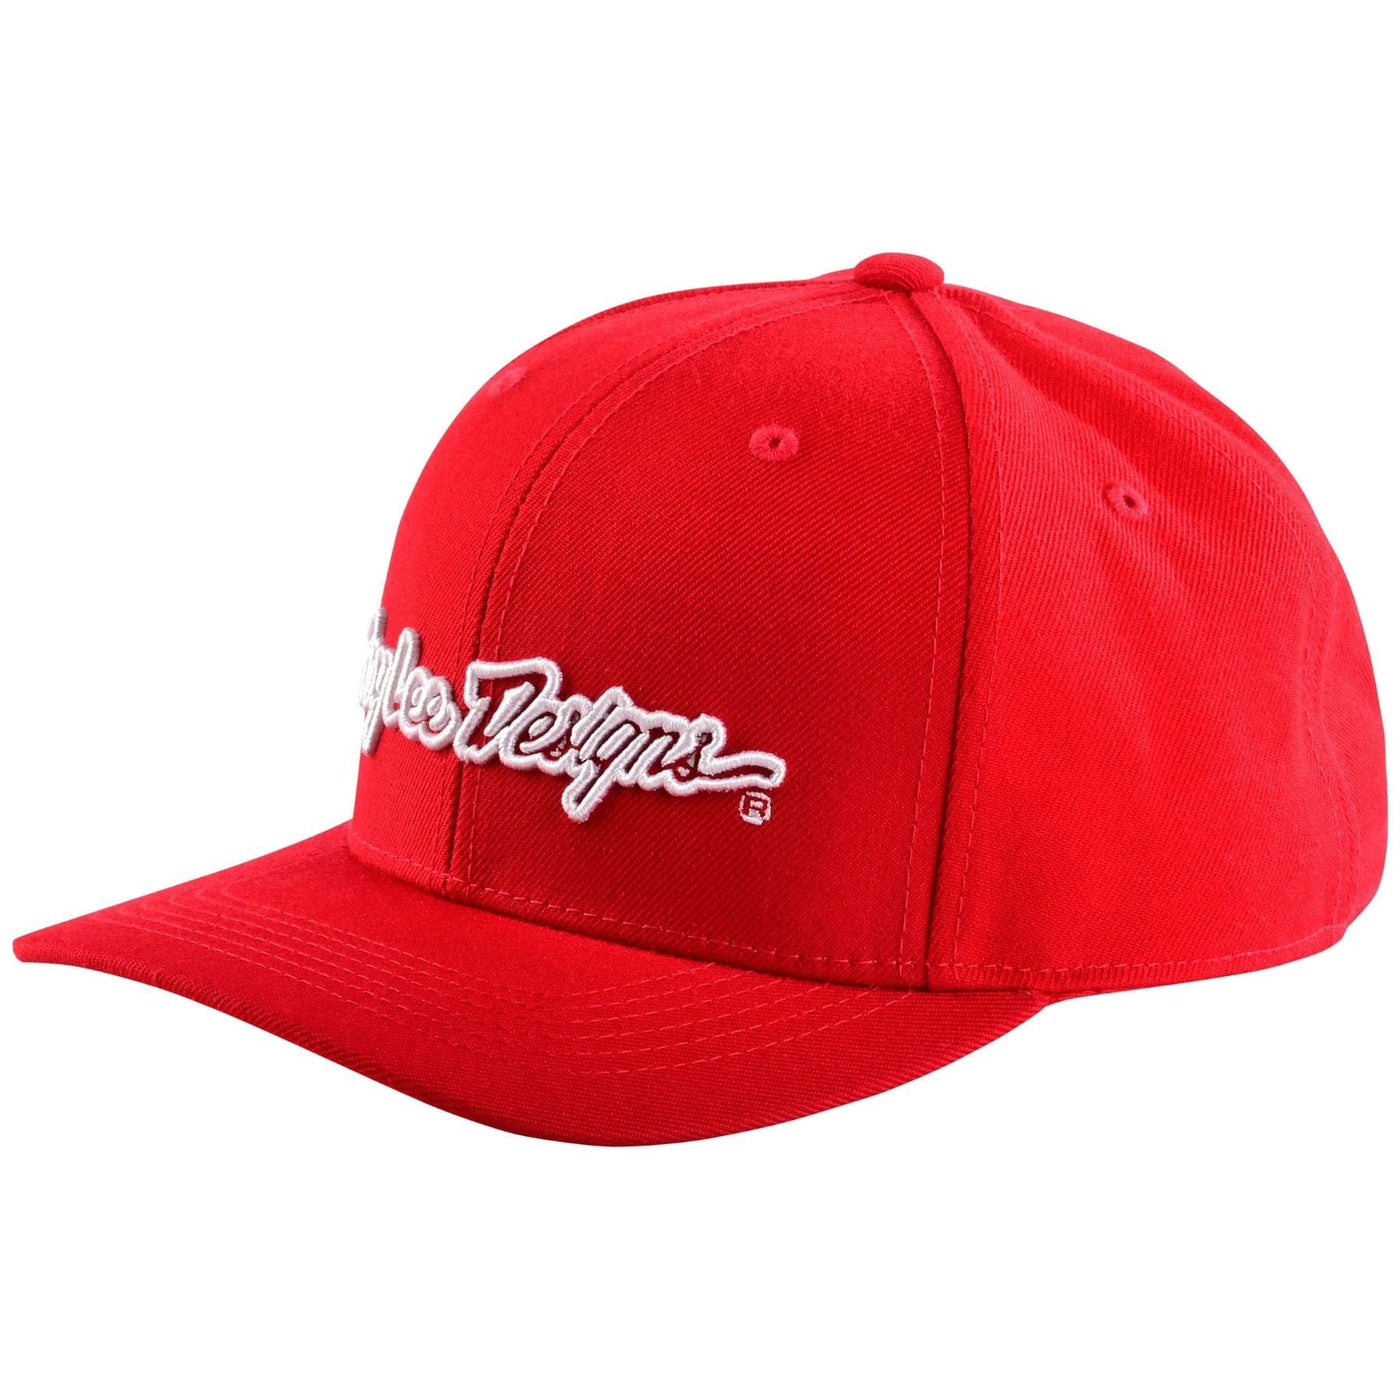 Troy Lee Designs 9FORTY Curved Signature Snapback Hat - Red/White